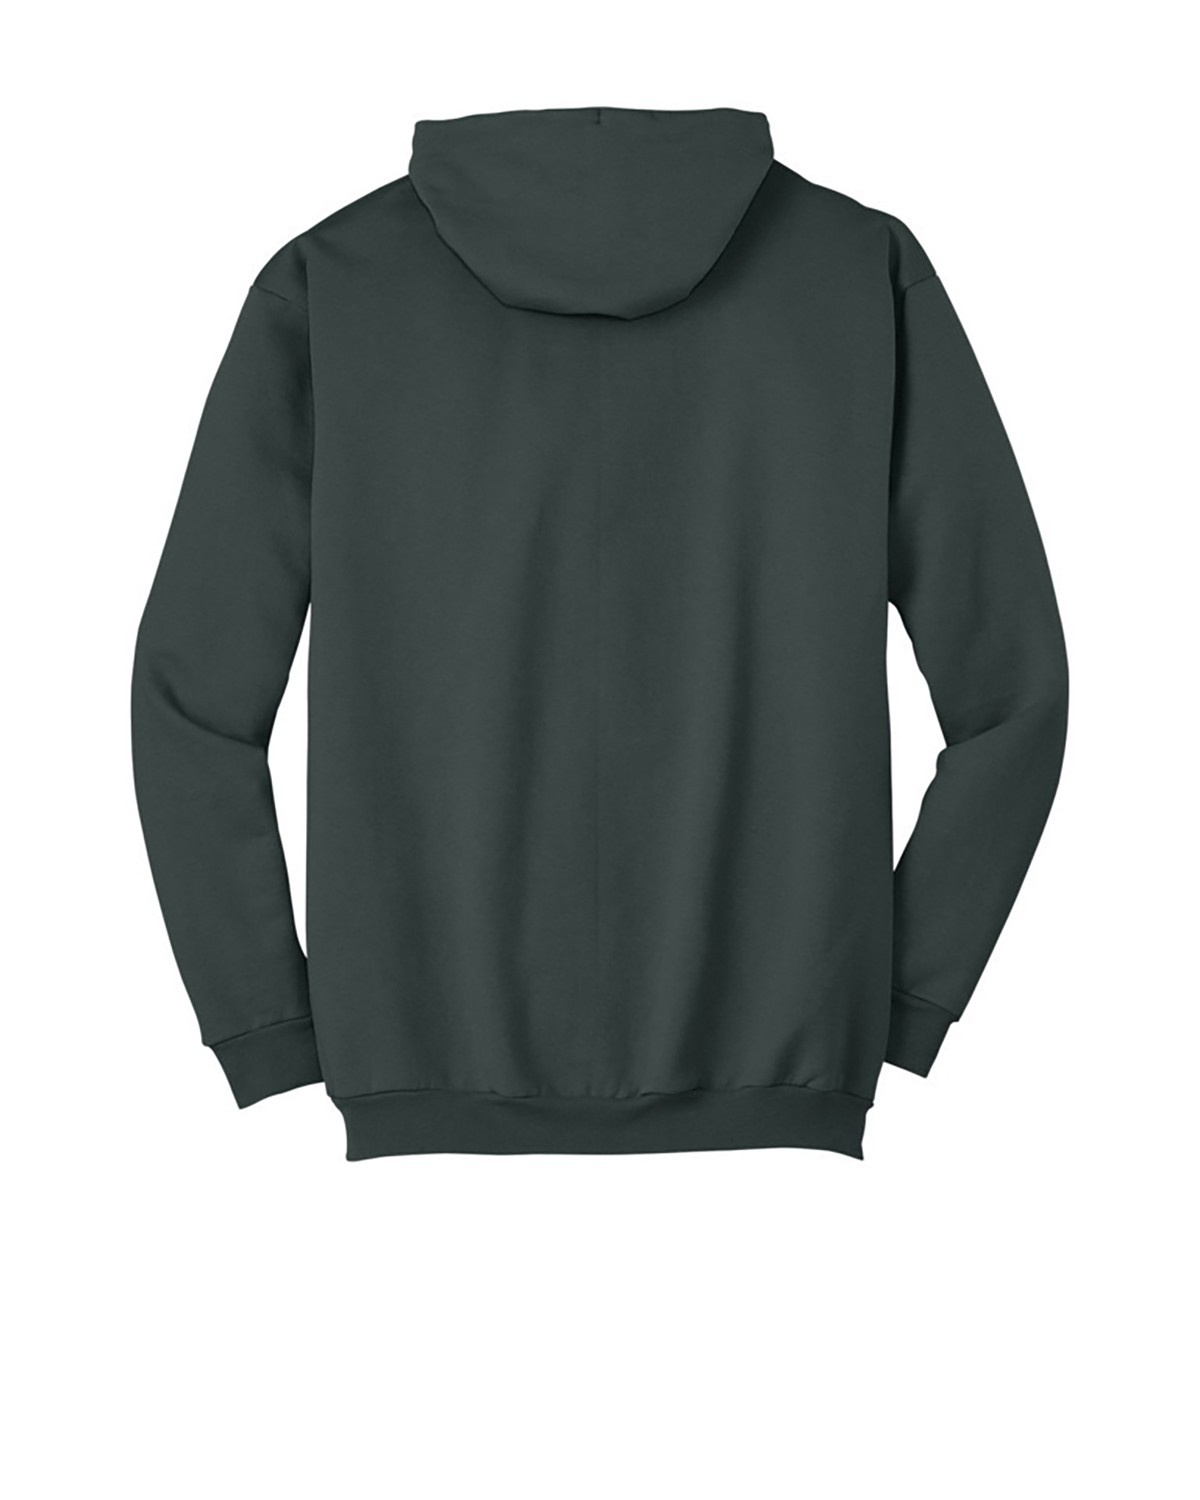 'Port & Company PC90HT Tall Essential Pullover Hooded Sweatshirt'